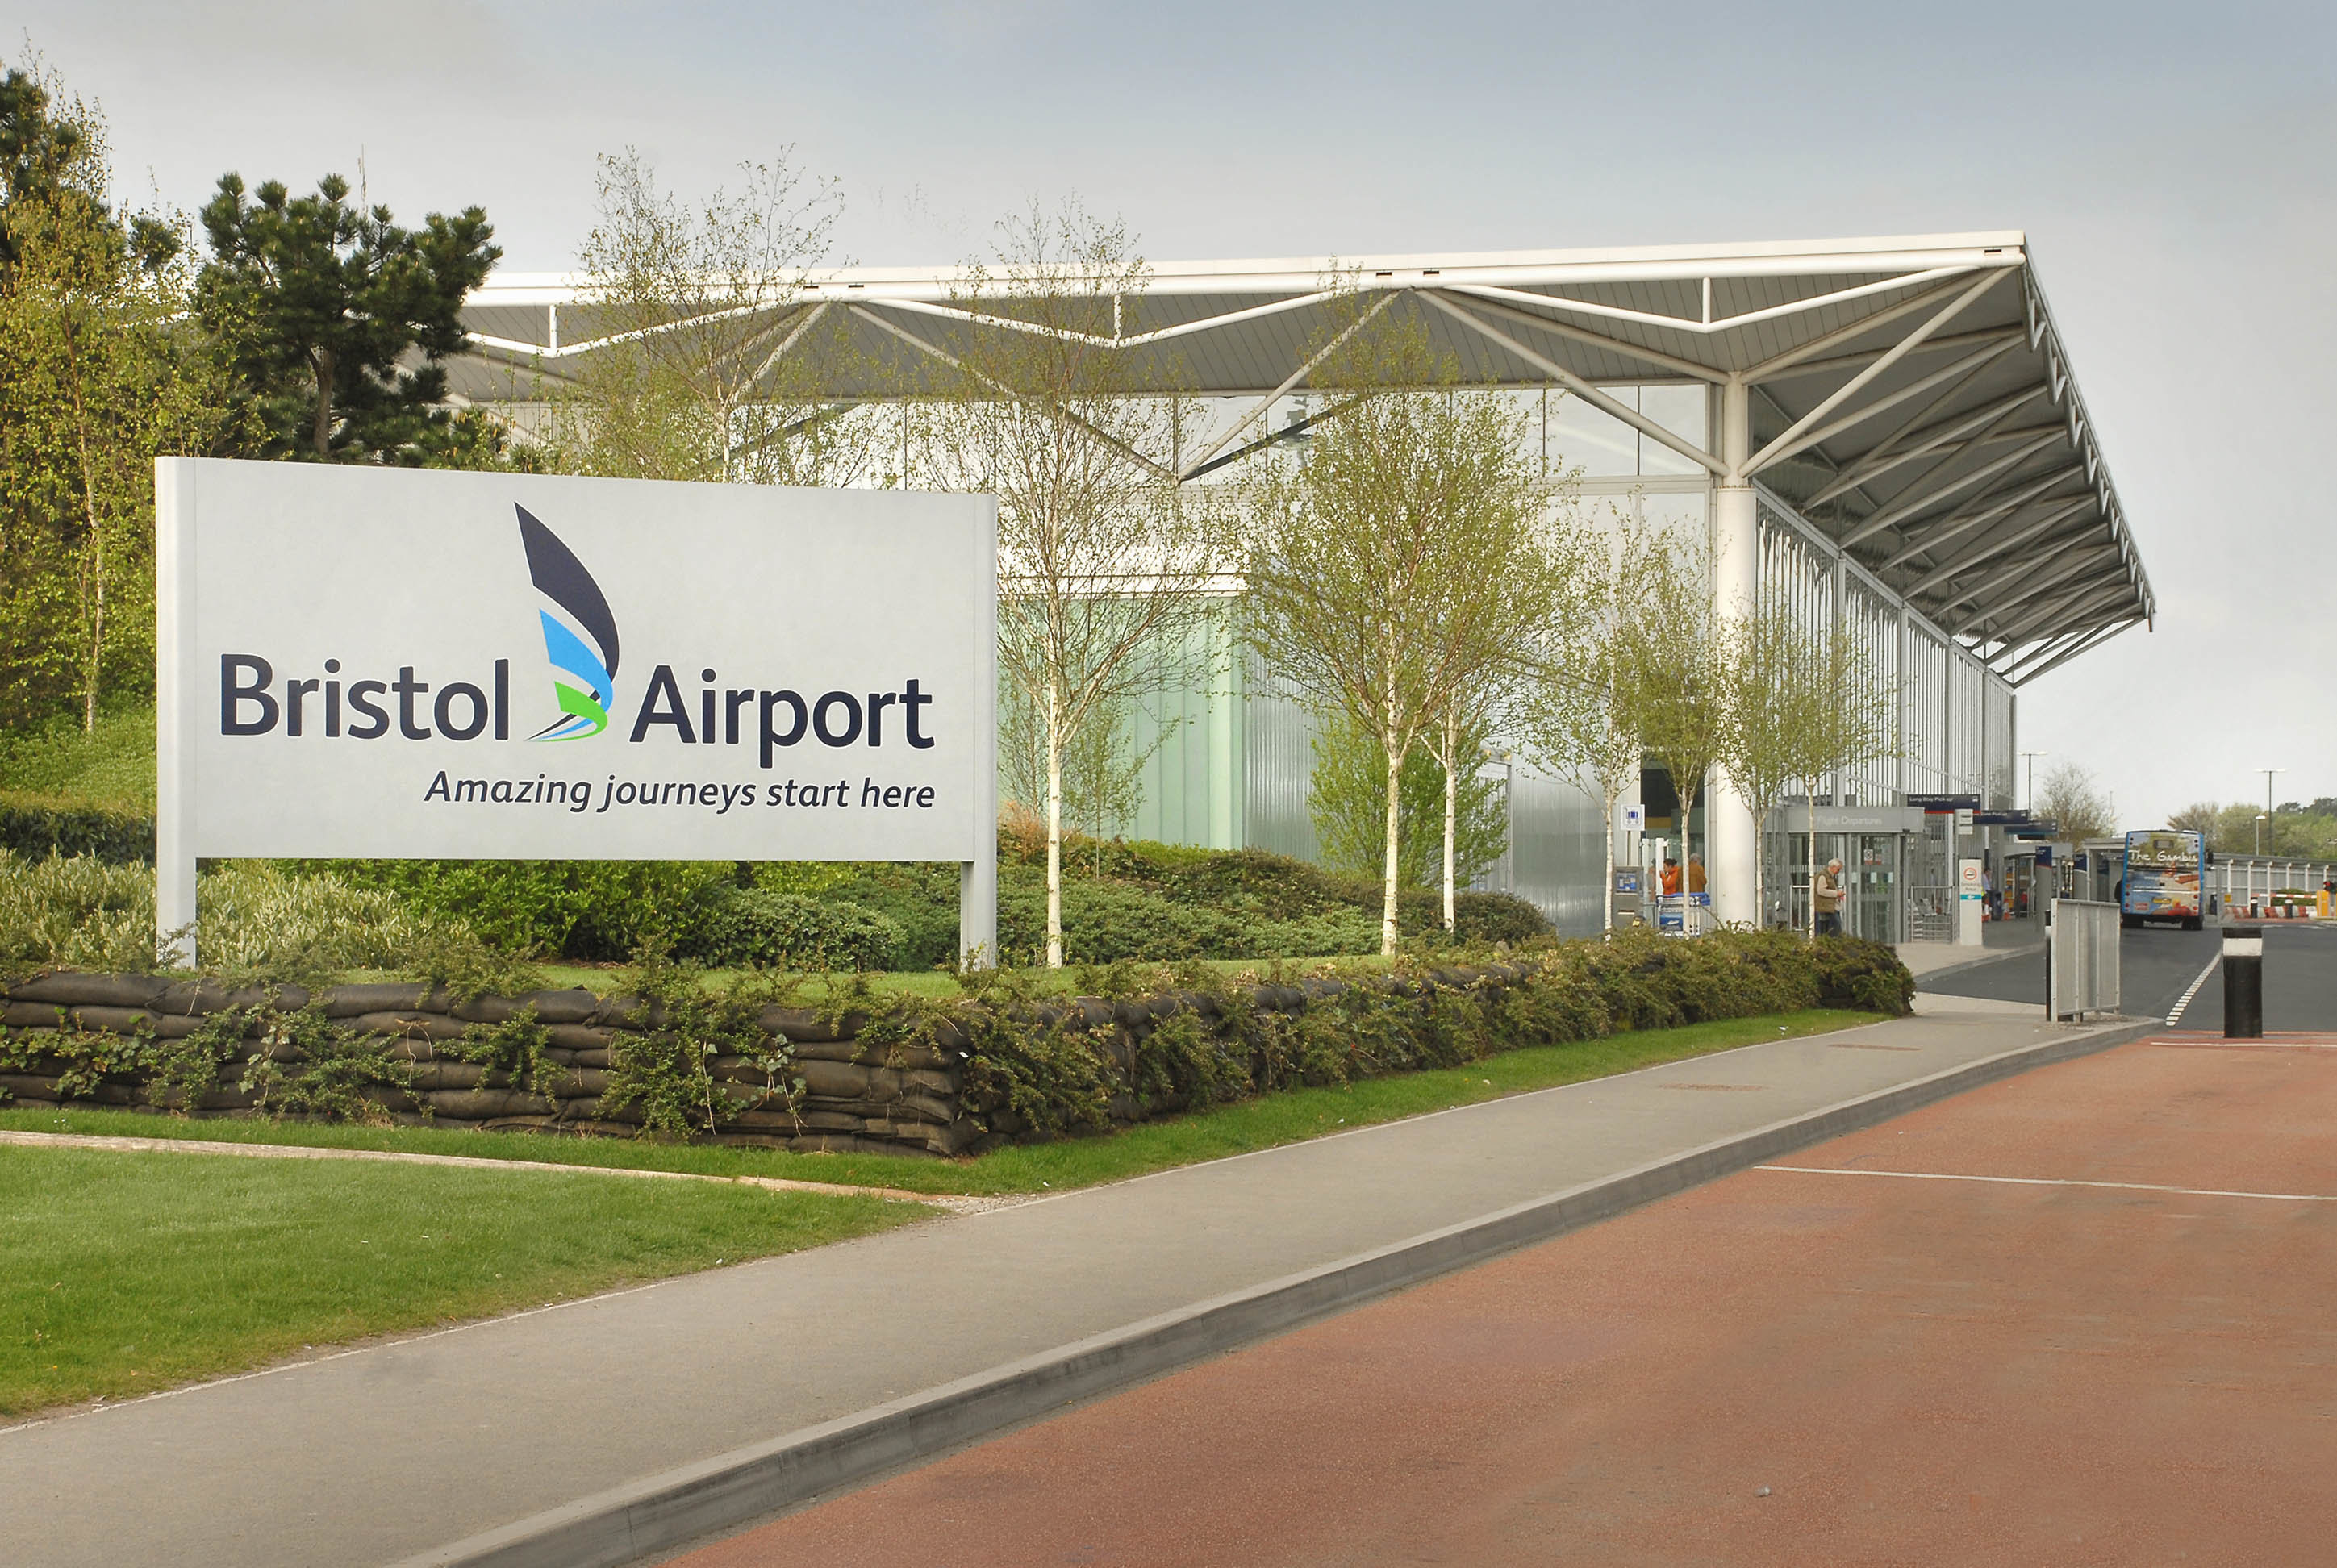 UK's Bristol Airport Powered by 100% Renewable Electricity